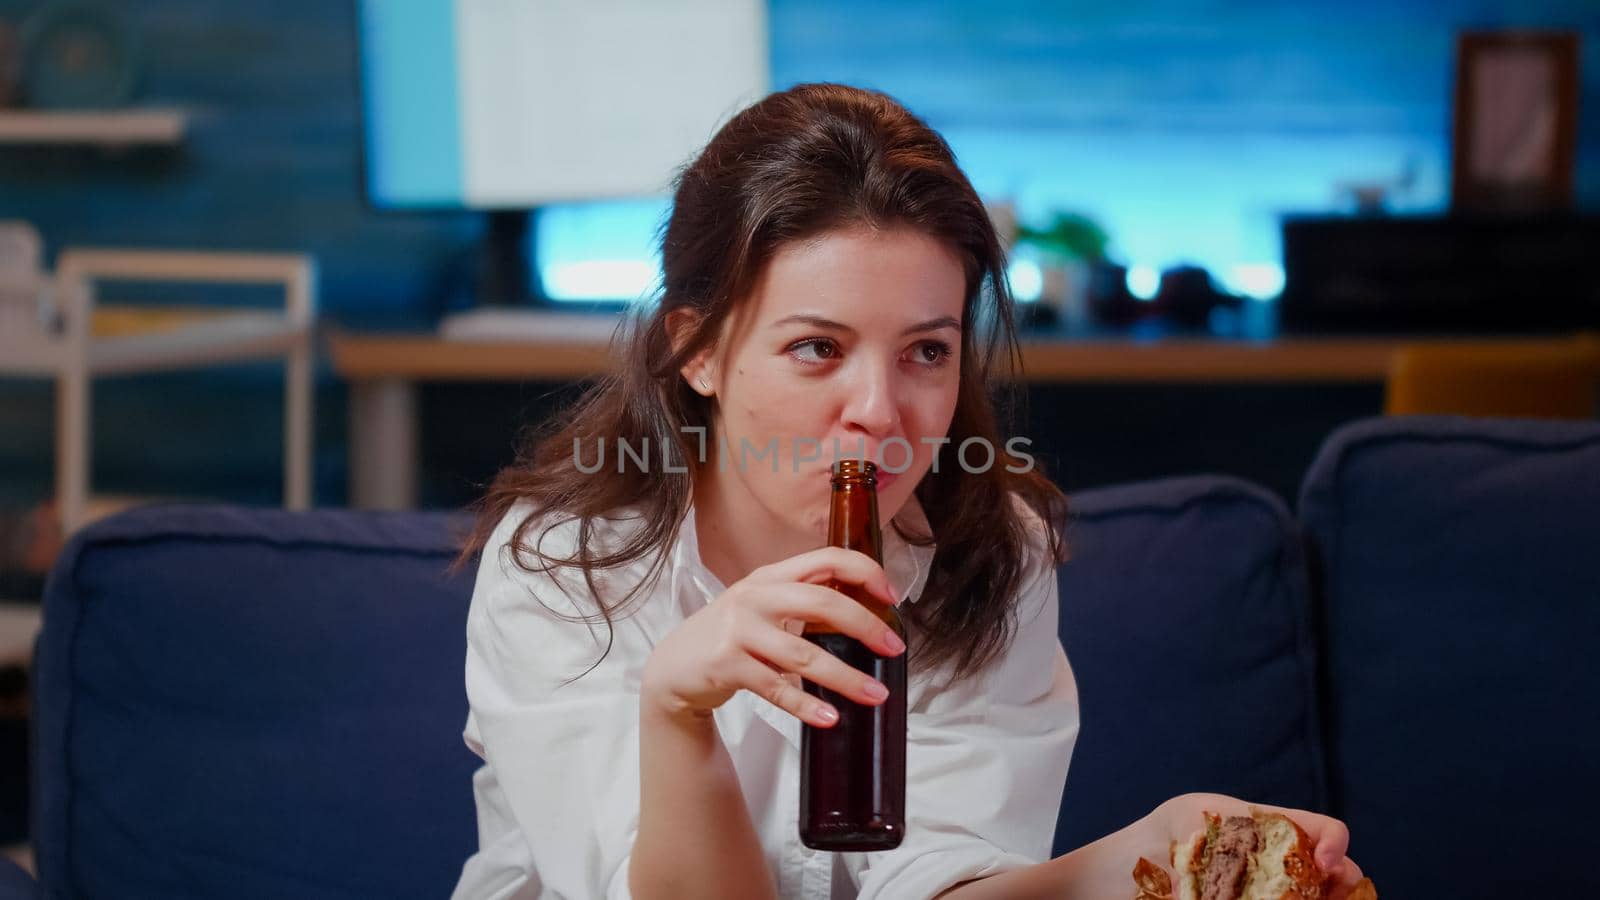 Young person with fast food meal watching television by DCStudio